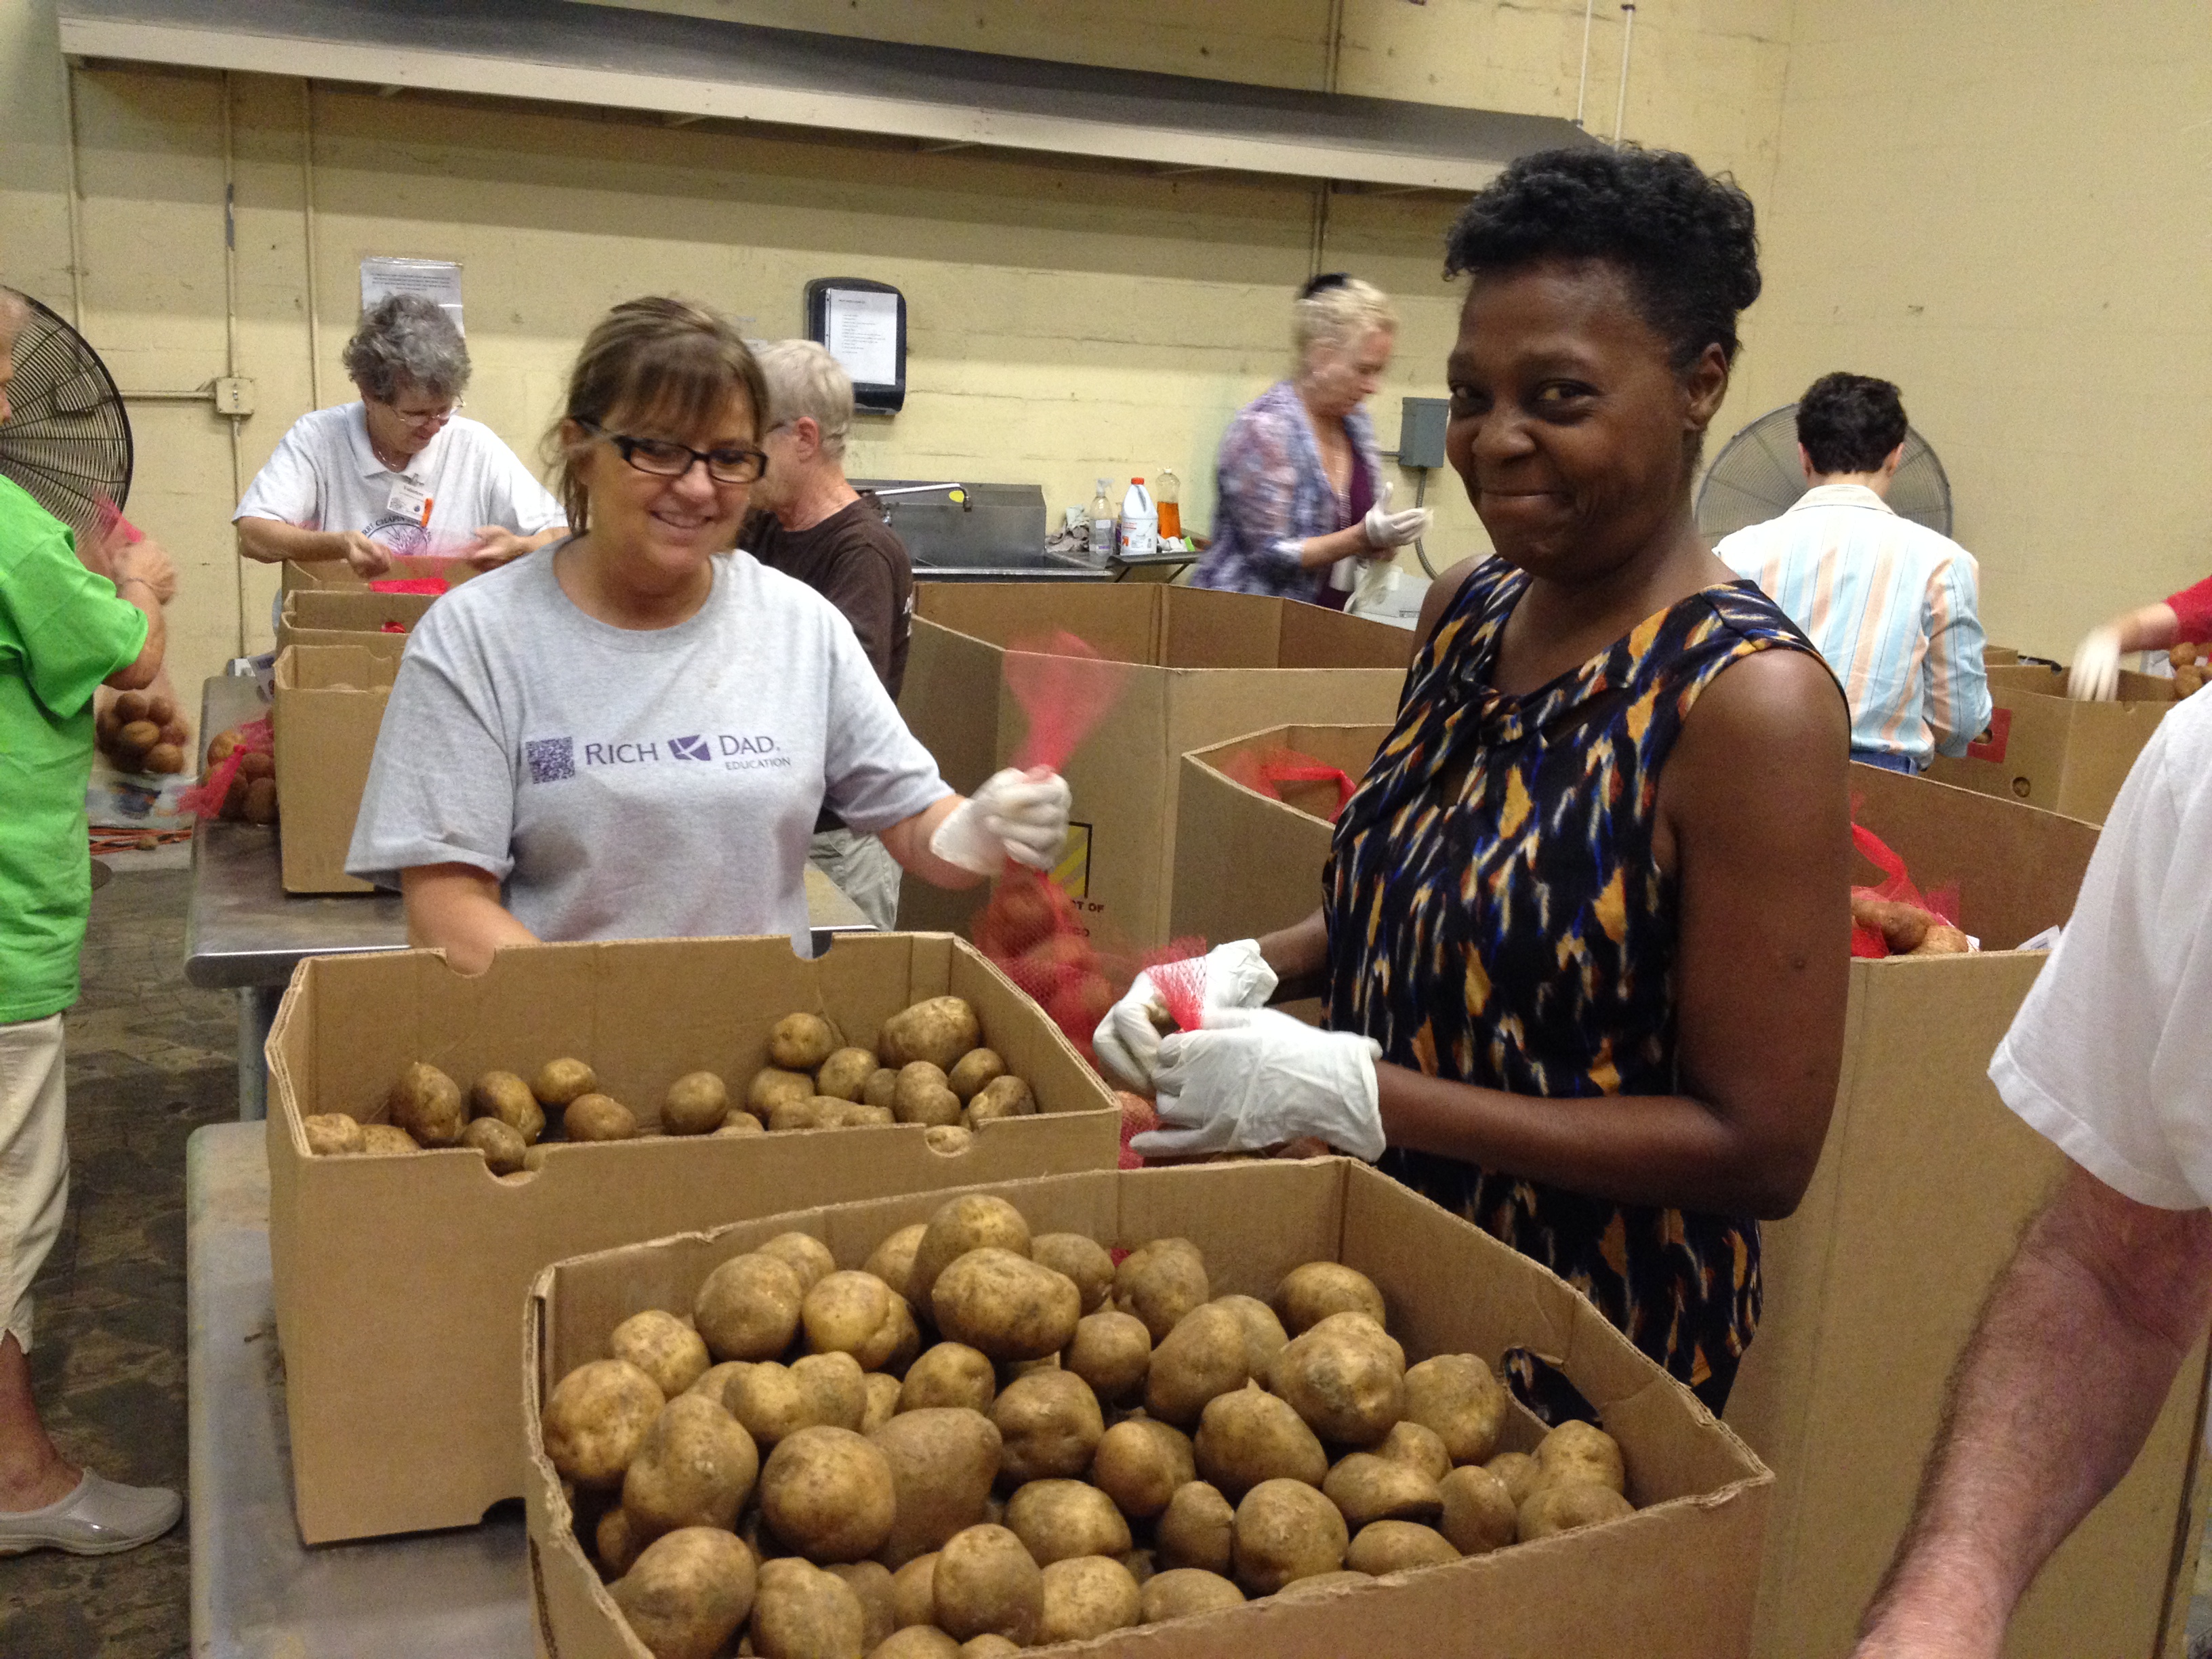 Rich Dad Education employees volunteer at the Harry Chapin Food Bank